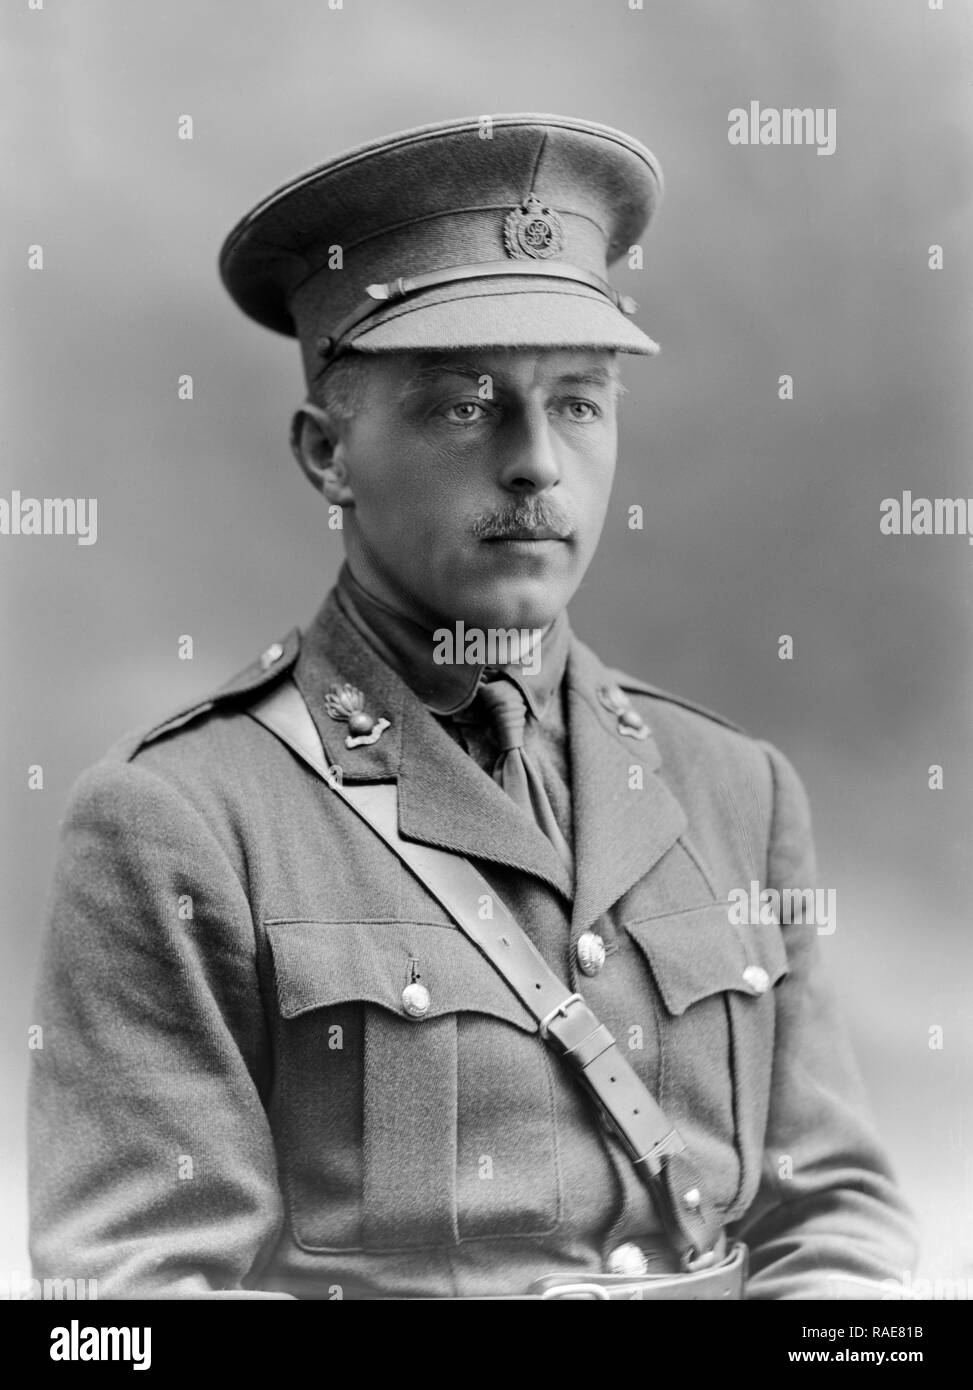 Photograph taken on 1st April 1915. Lieutenant R. N. Aylward of the Royal Engineers of the British Army. Taken in the famous Bassano Photography Studio in London. First World War soldier. Stock Photo